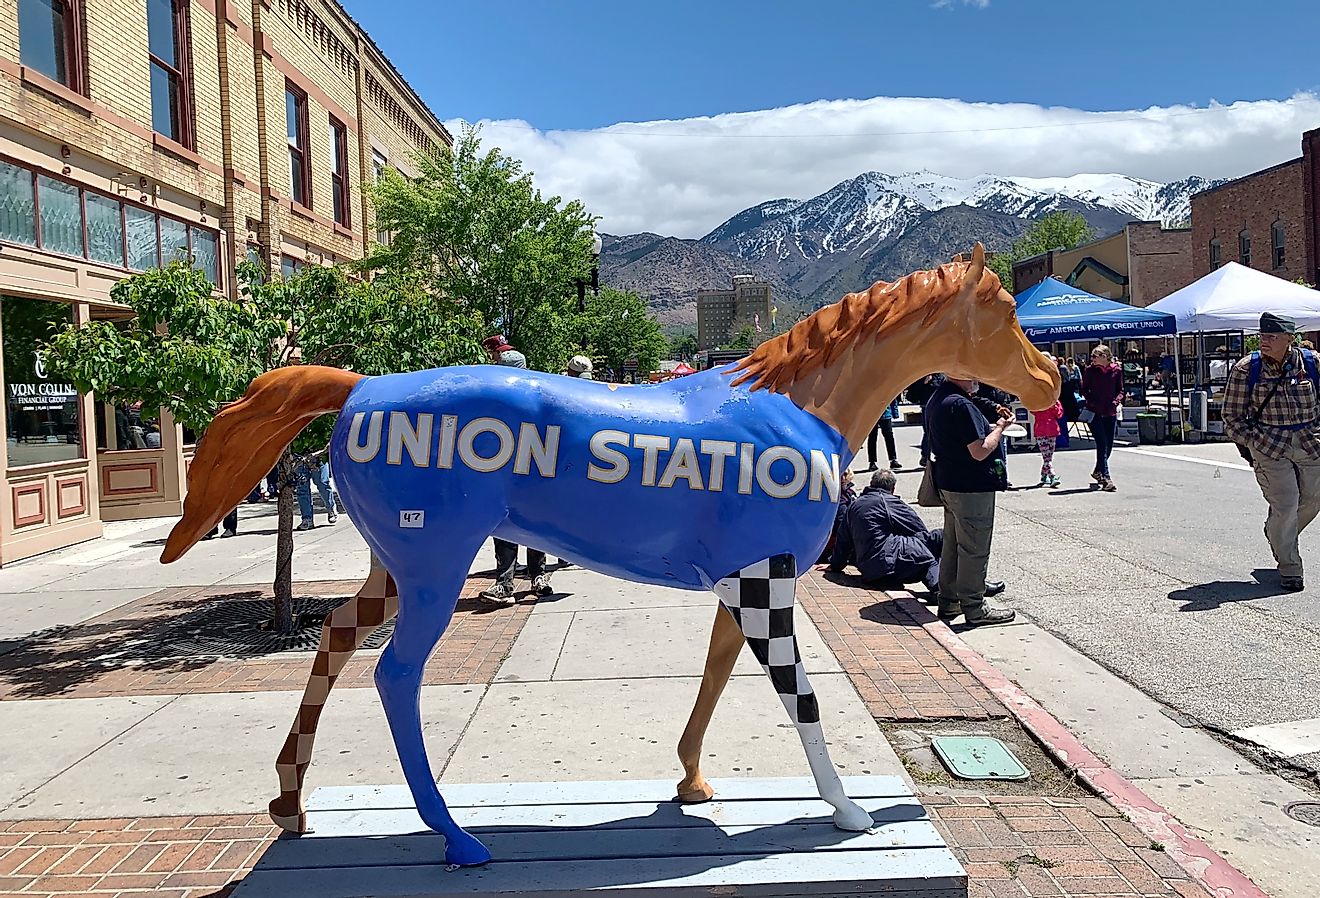 A horse statue painted with union station logo stands on Historic 25th Street in Ogden, Utah. Image credit PureRadiancePhoto via Shutterstock